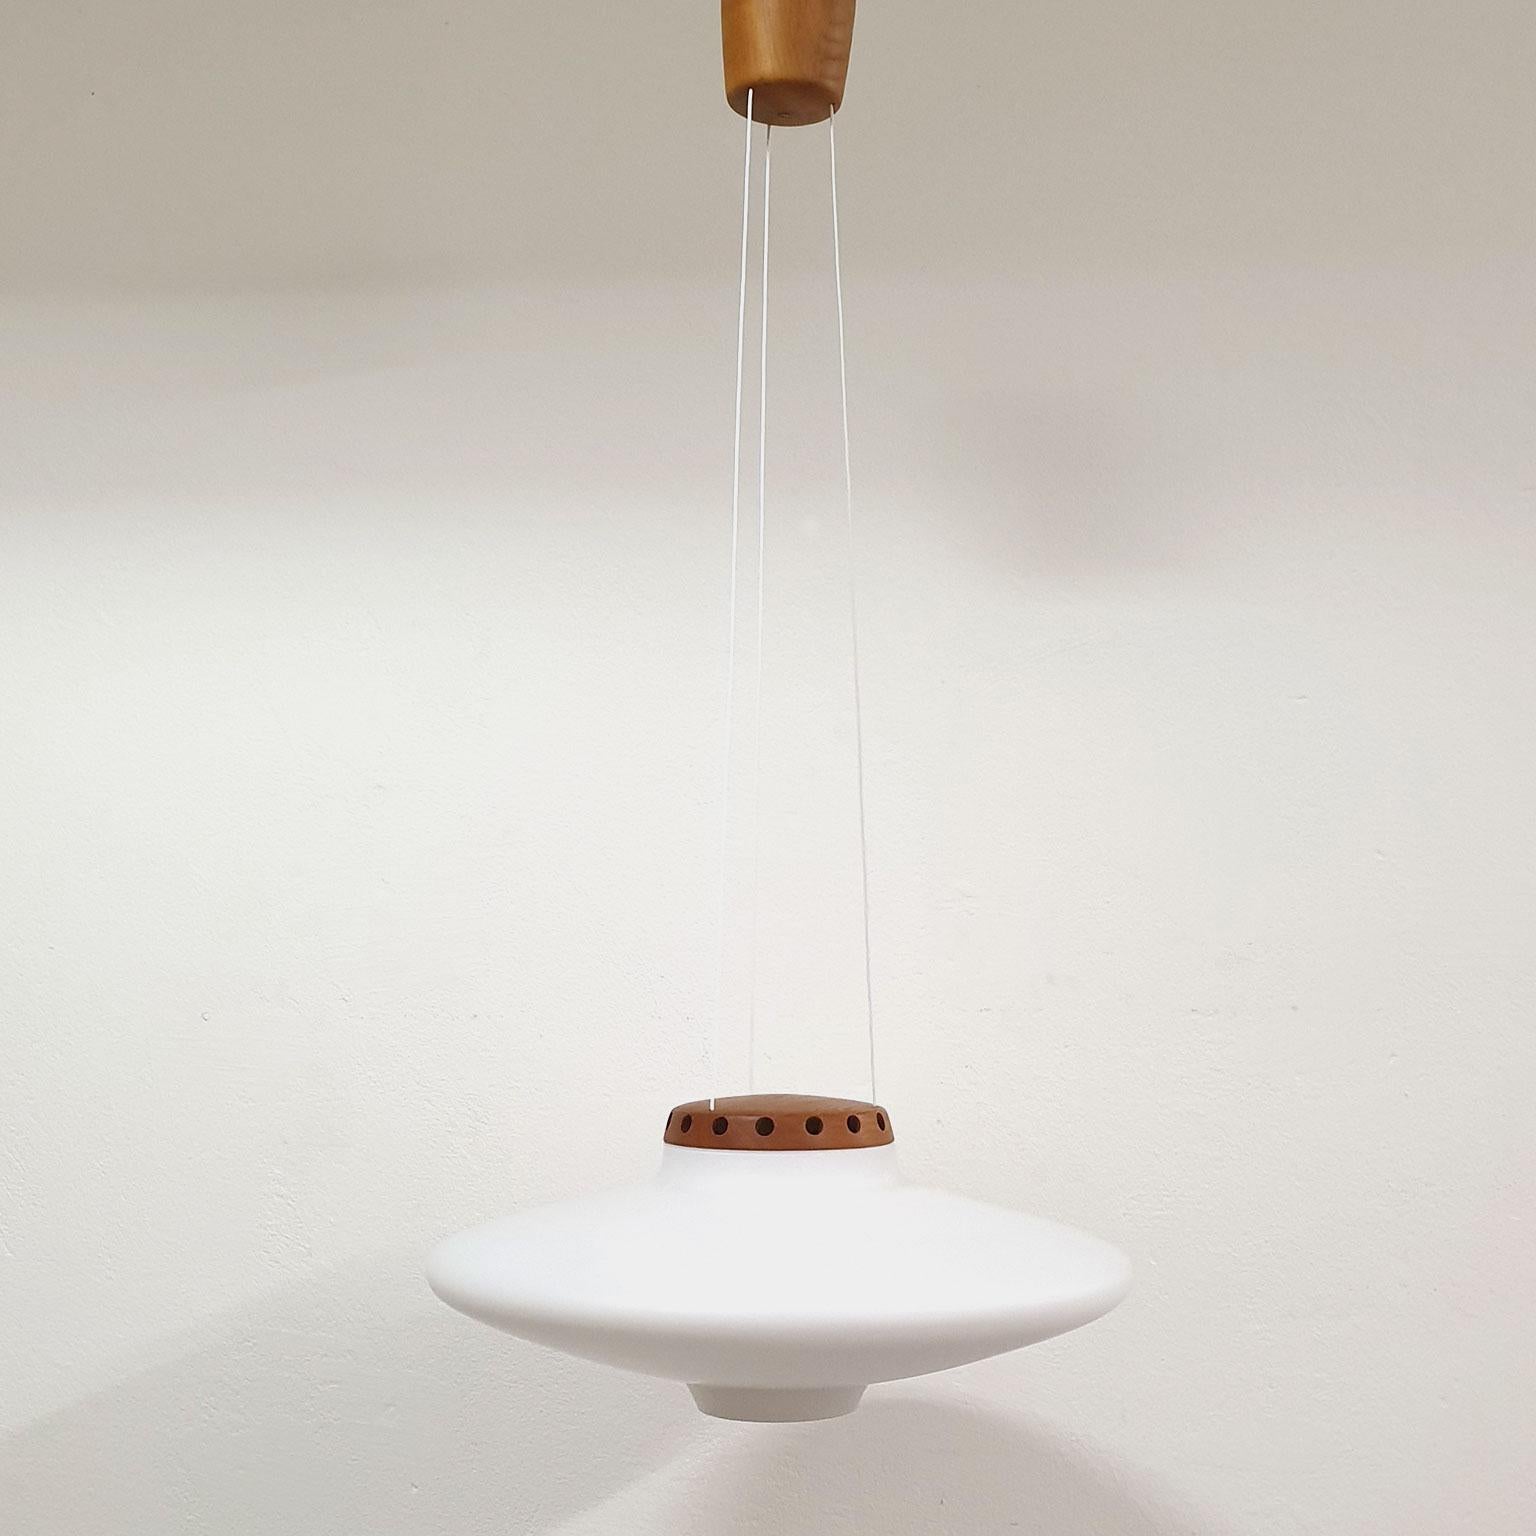 Teak and white opaline glass pendant, manufactured by Luxus in Sweden.
New wiring, overall very good condition.
Measure: Total height 38.6 inch (98 cm).